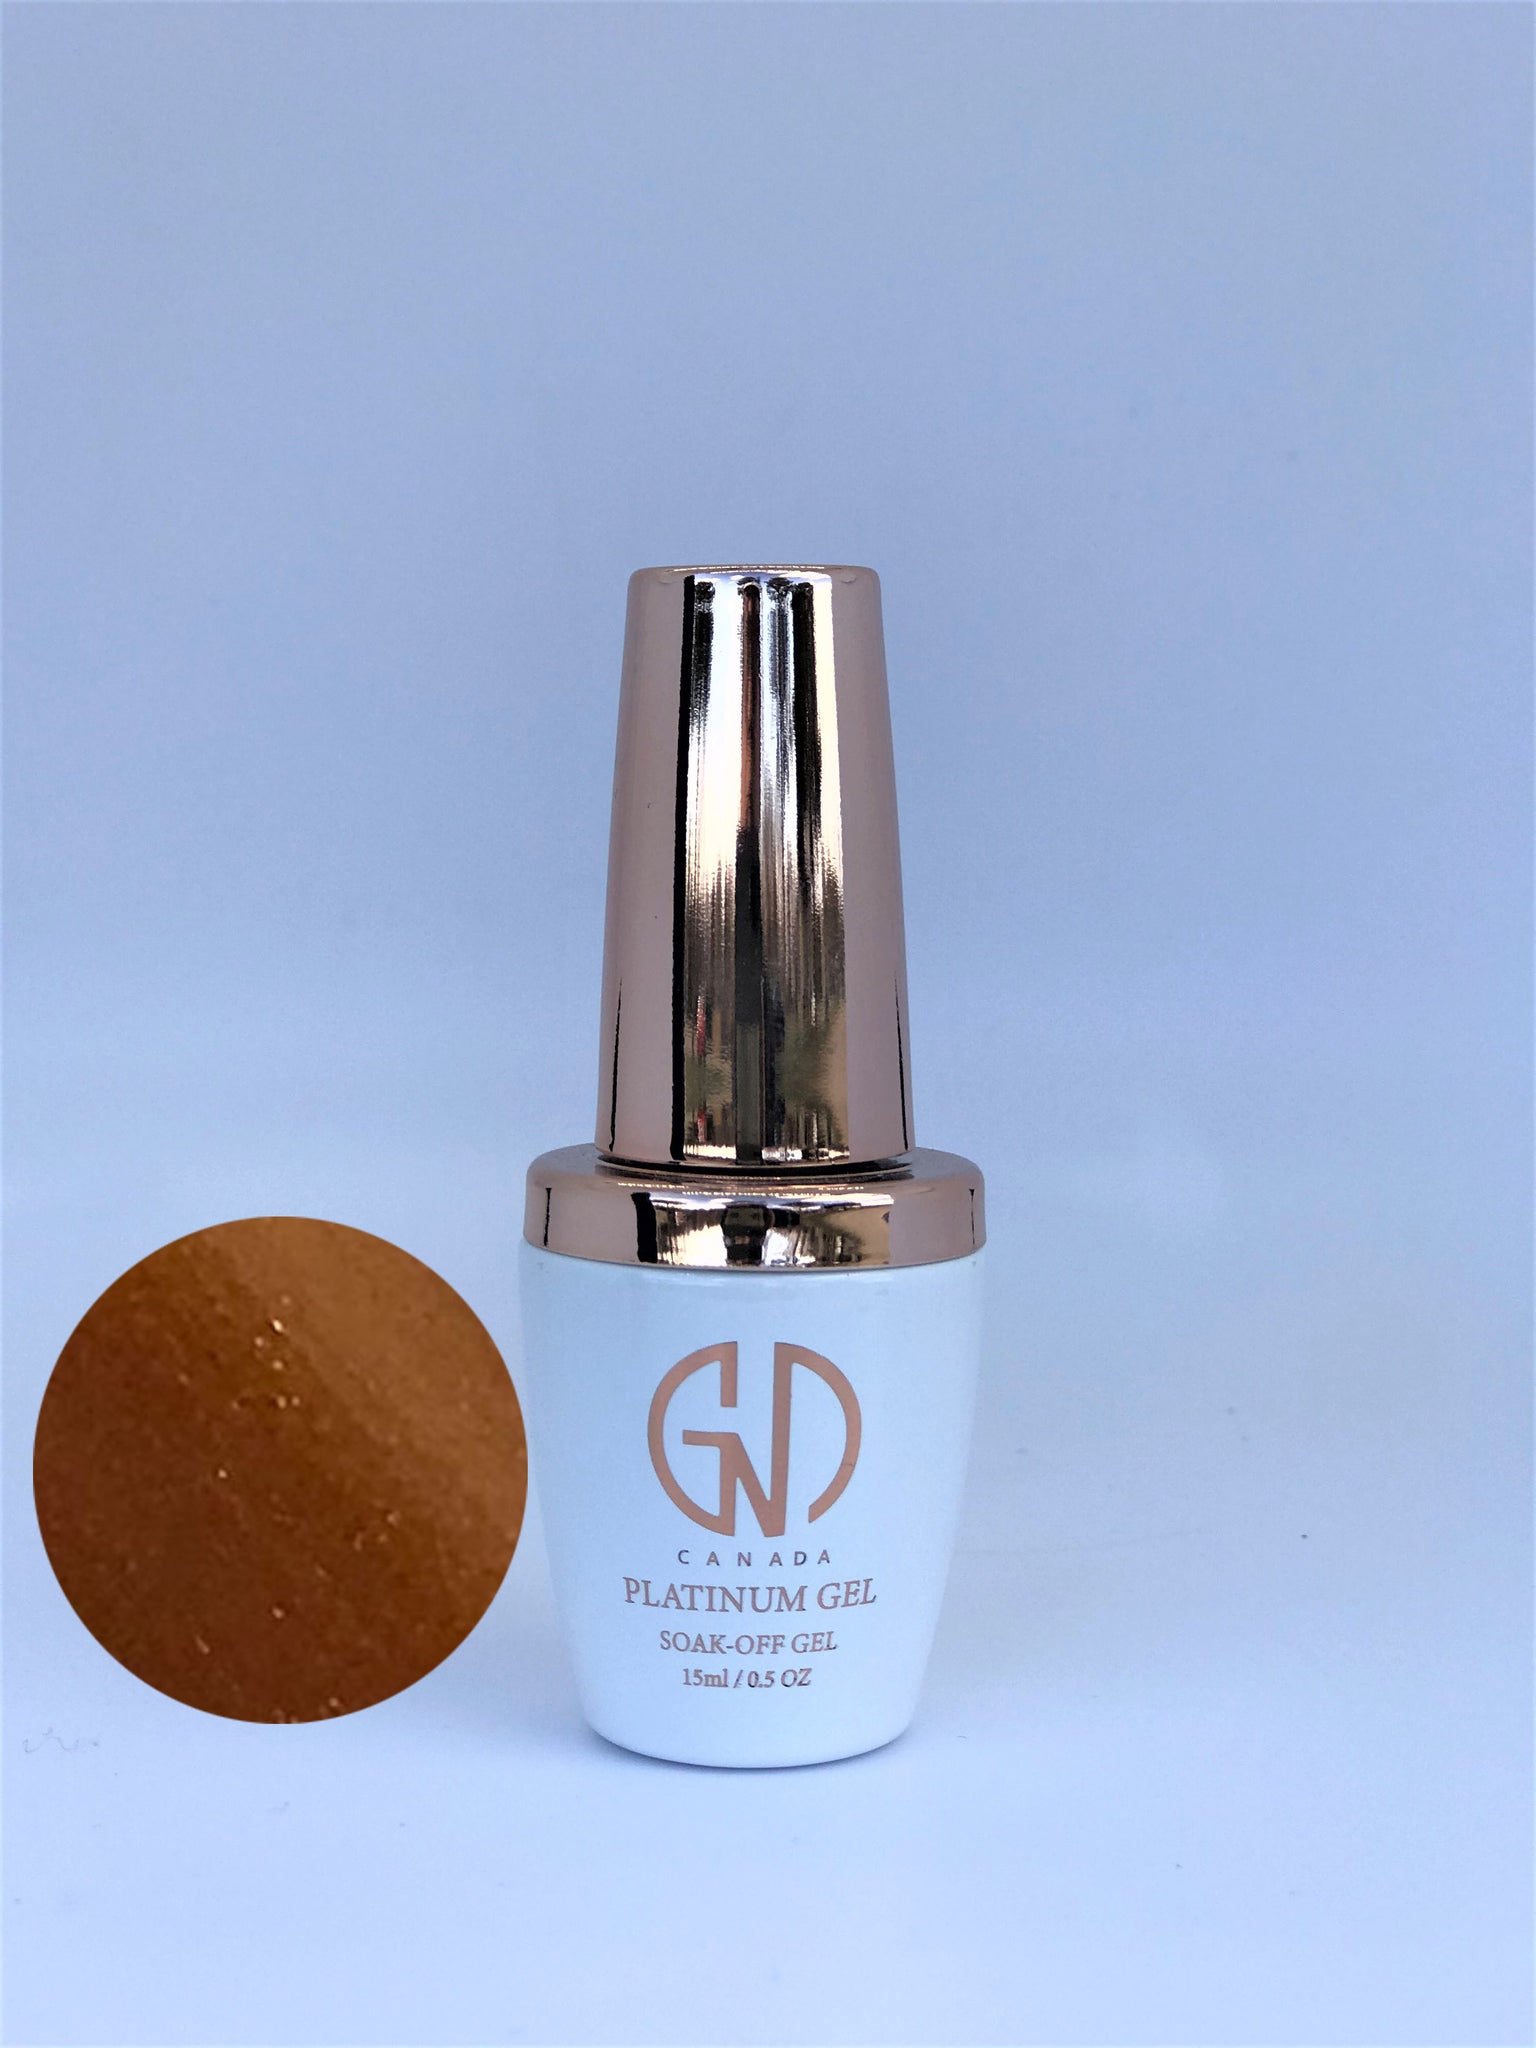 GND Platinum Gel #4 | GND Canada® - CM Nails & Beauty Supply